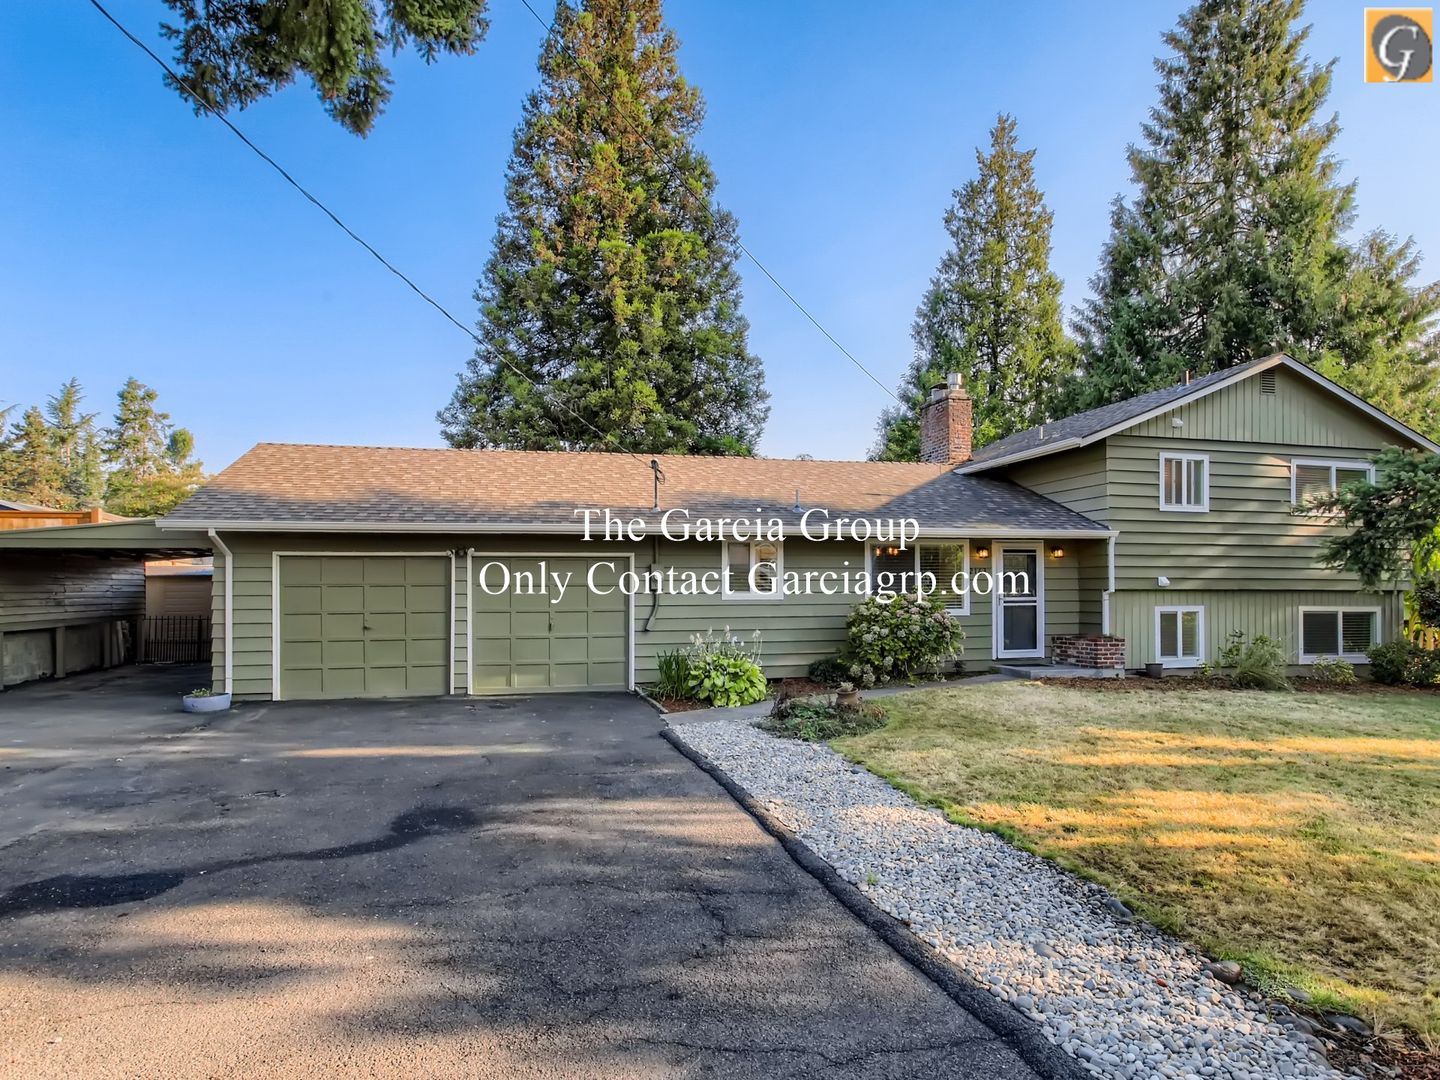 4 Bedroom 2 Bath West Linn Home with Remodeled Kitchen and Private Backyard!